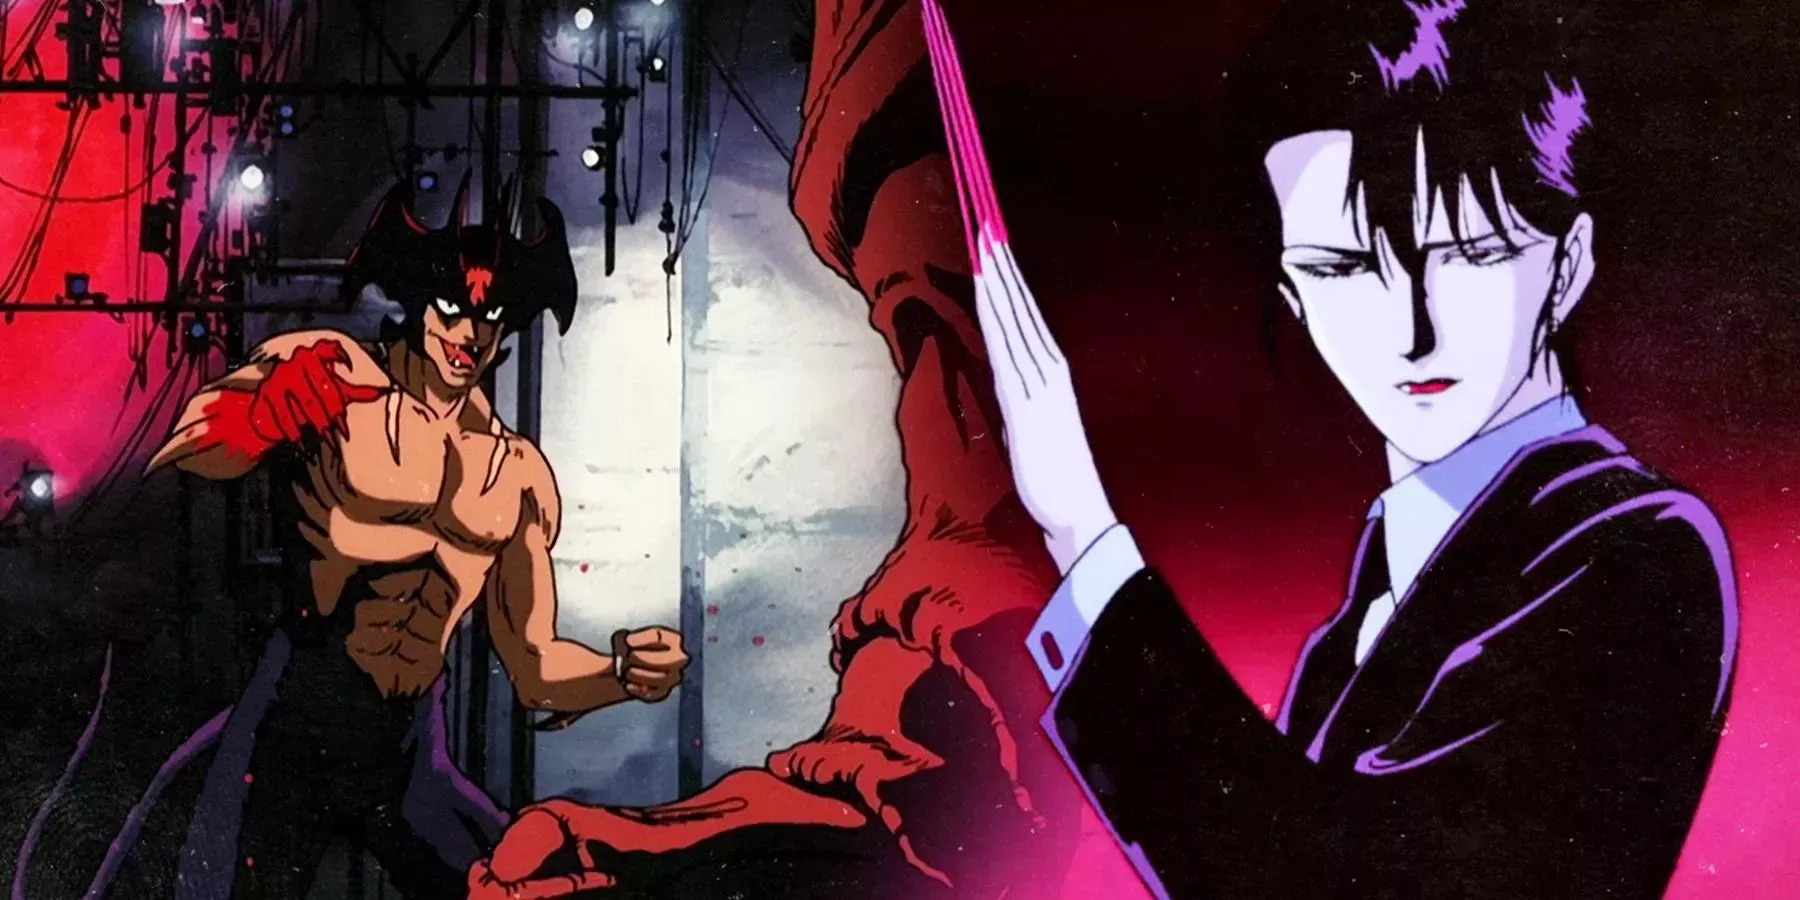 Images from animes 'Devilman: The Birth' and 'Wicked City'.